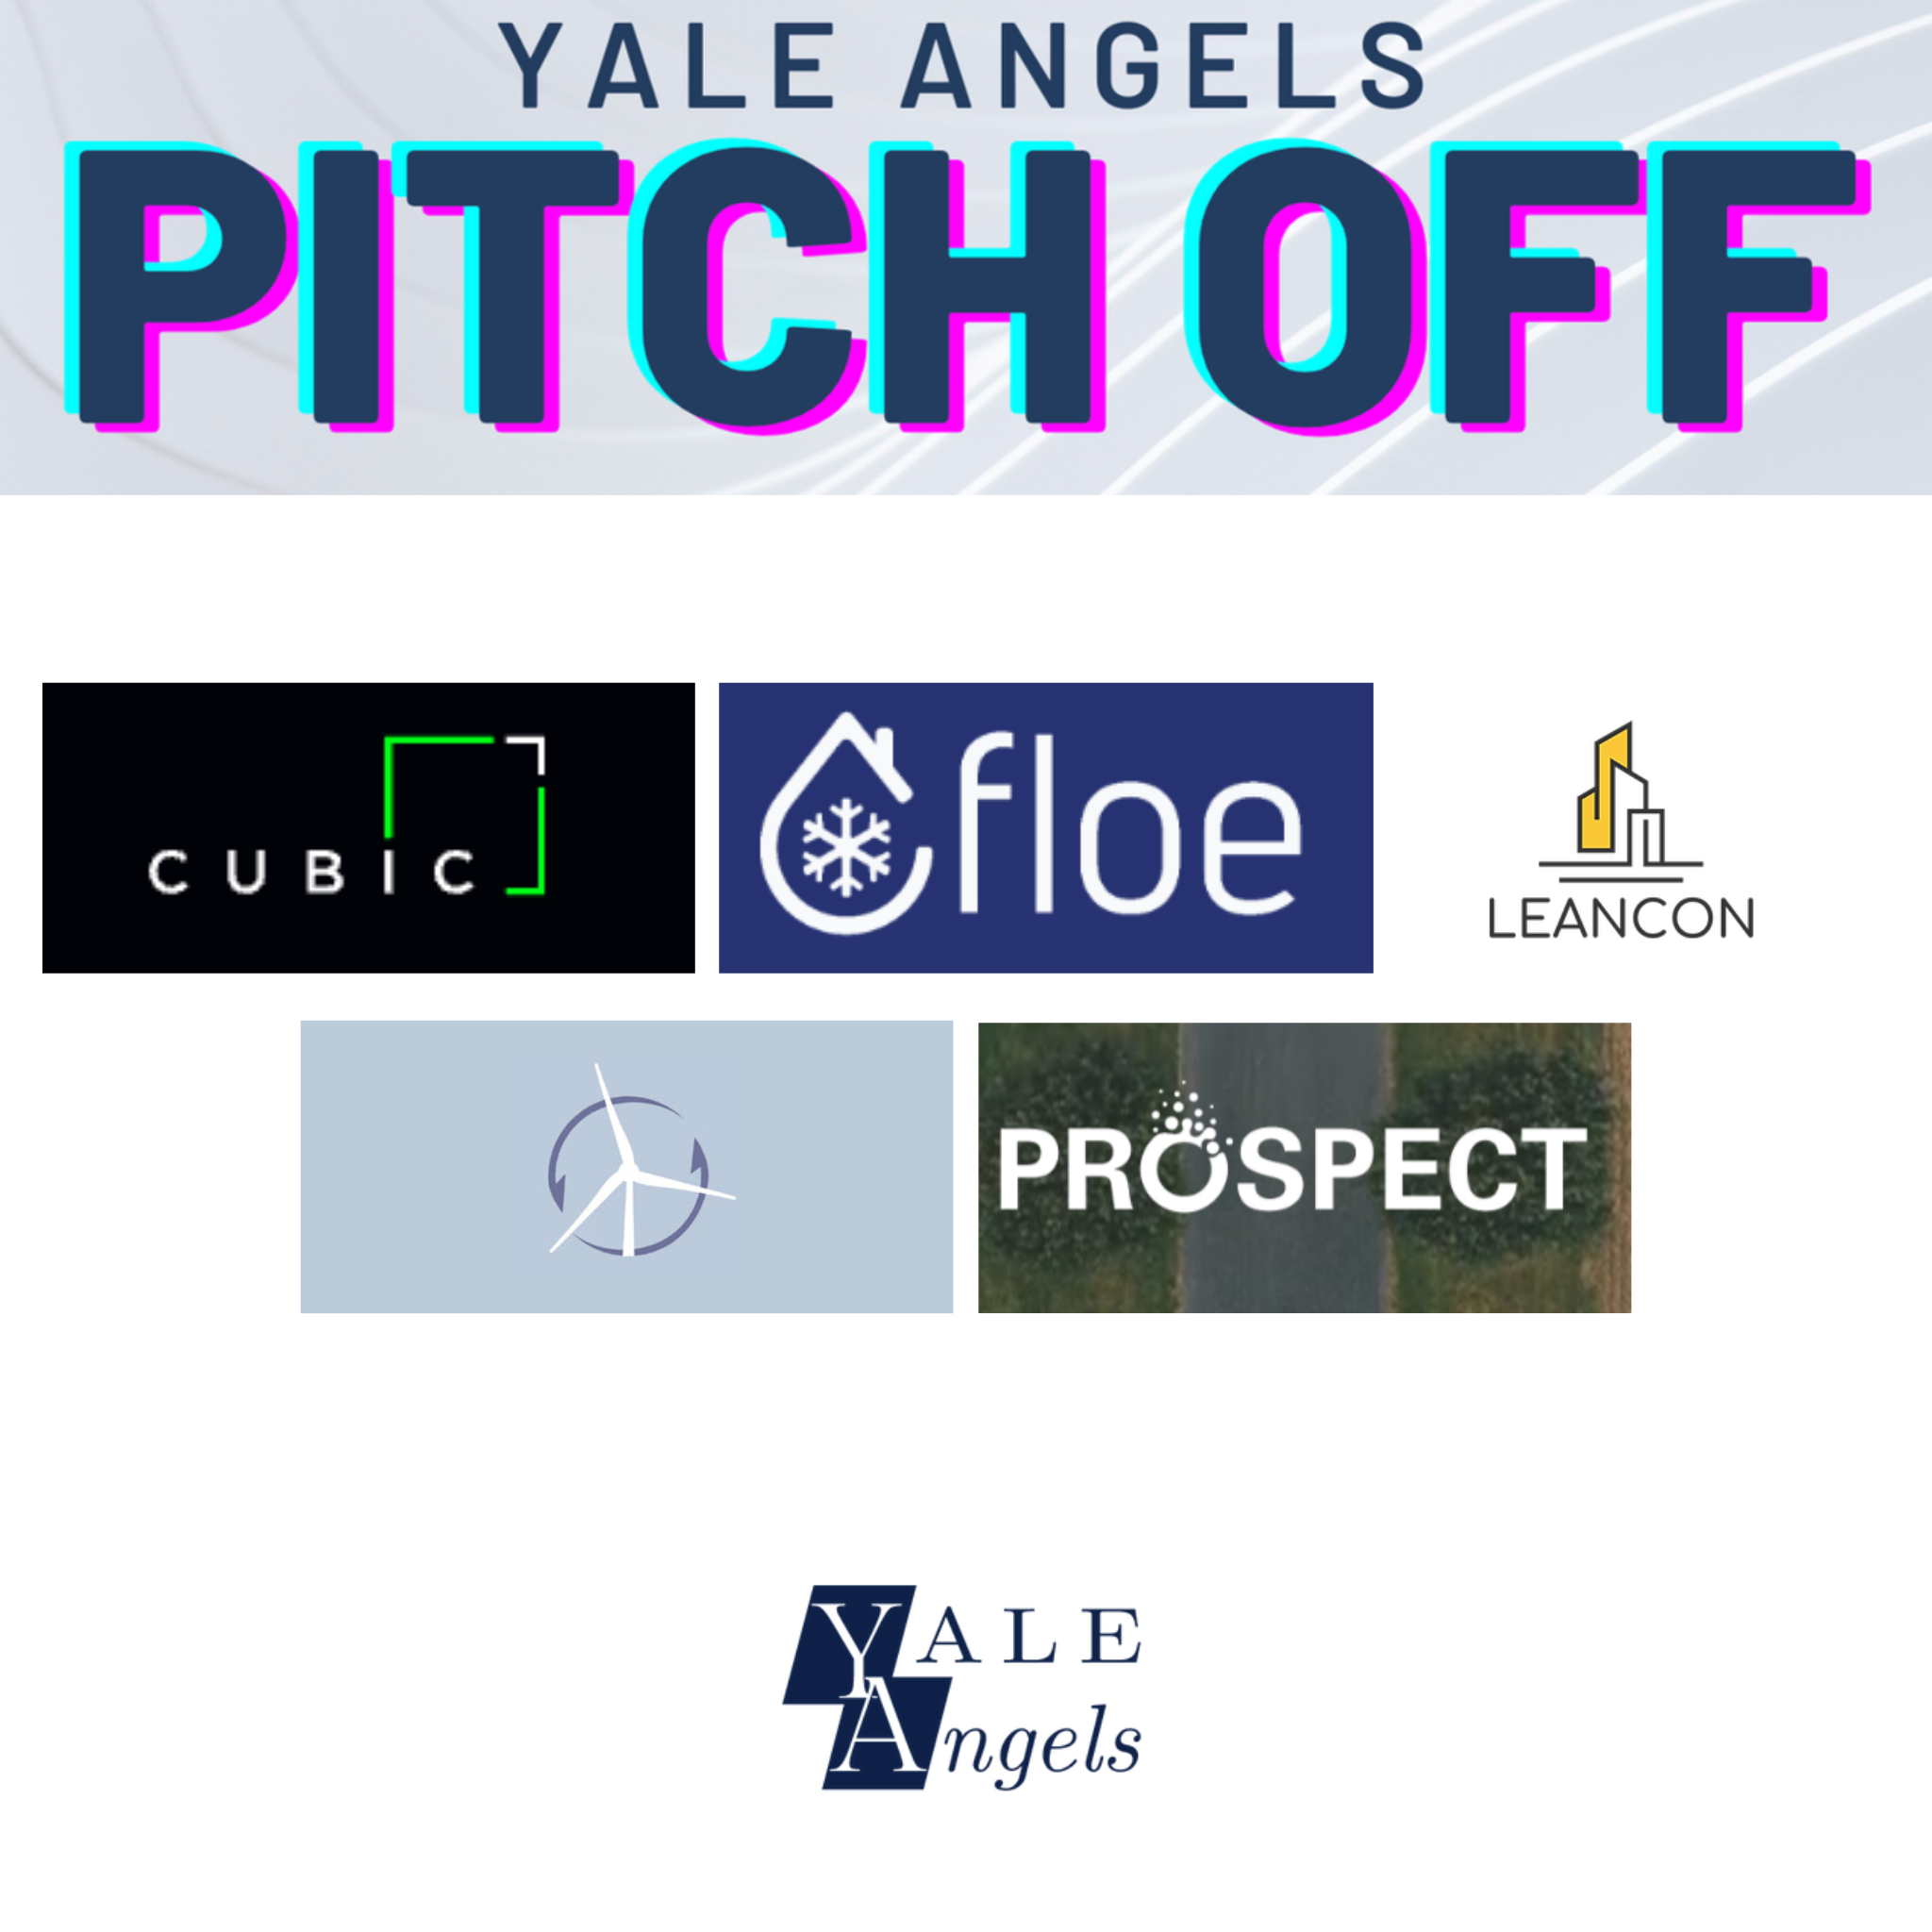 yale Angels pitchoff